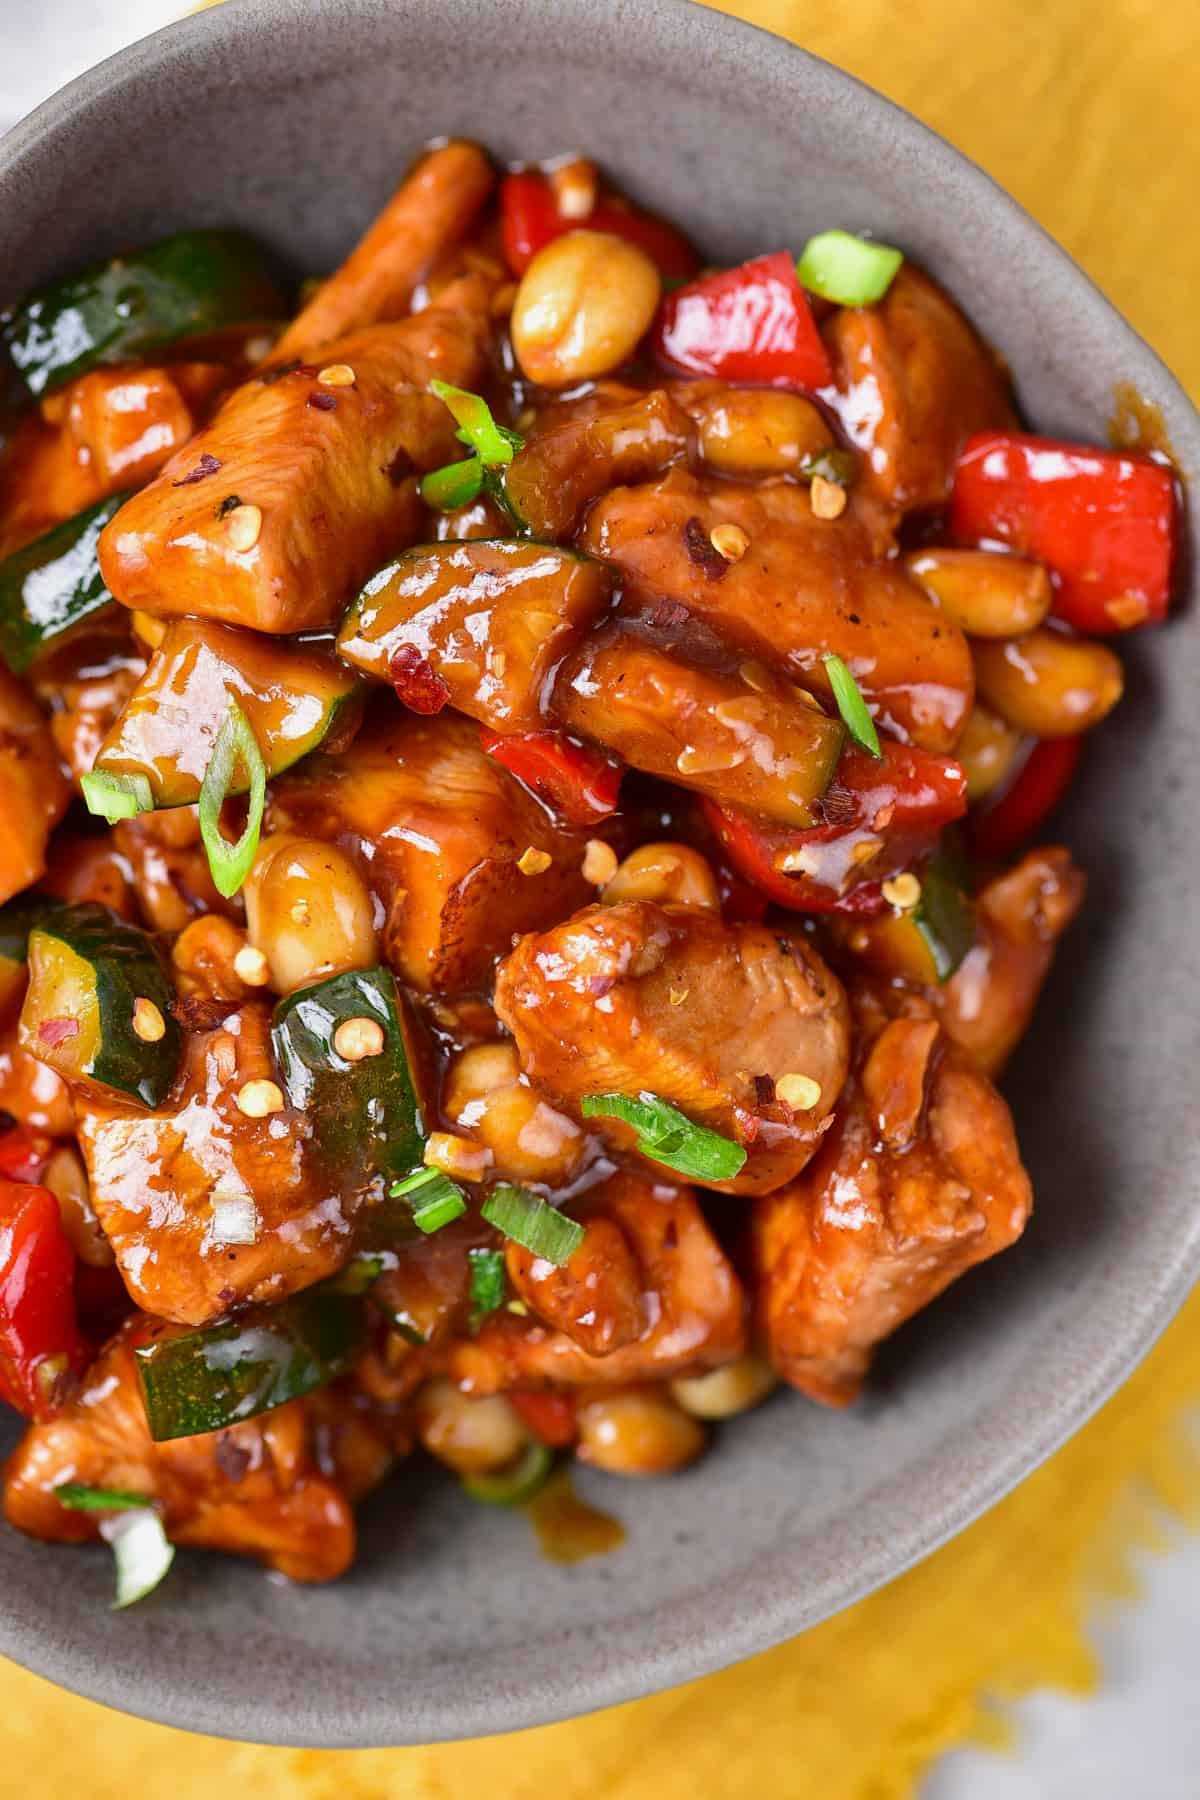 The completed kung pao chicken recipe.